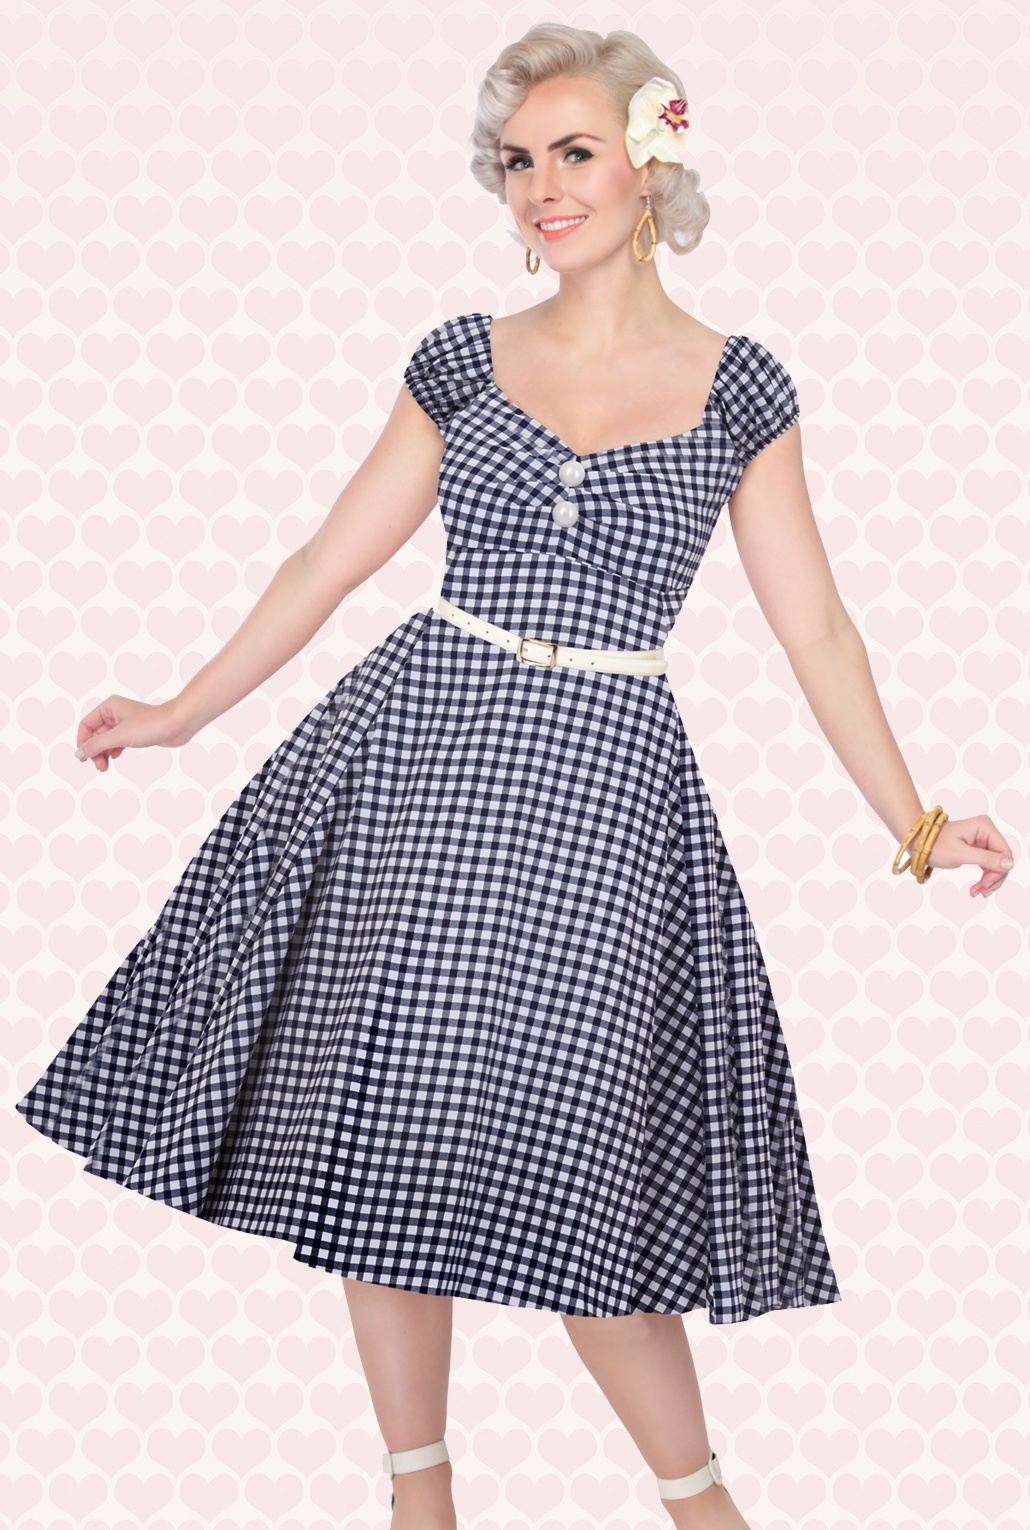 50s Dolores Doll Gingham Dress in Navy and White